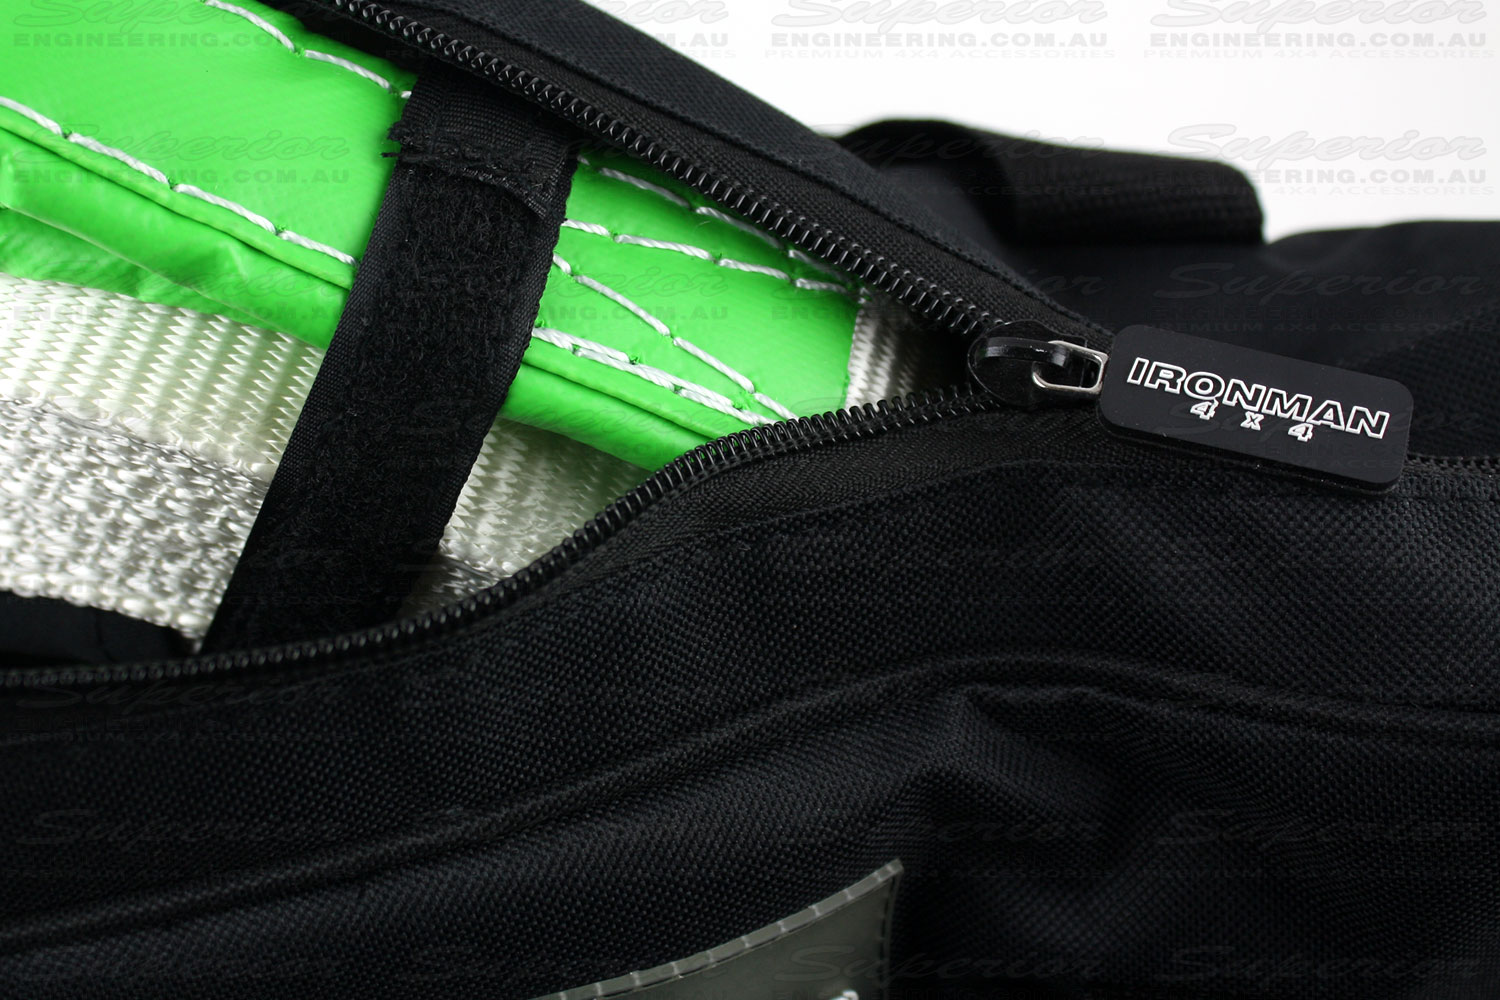 The kit bag comes with a strong webbing and reinforced zipper